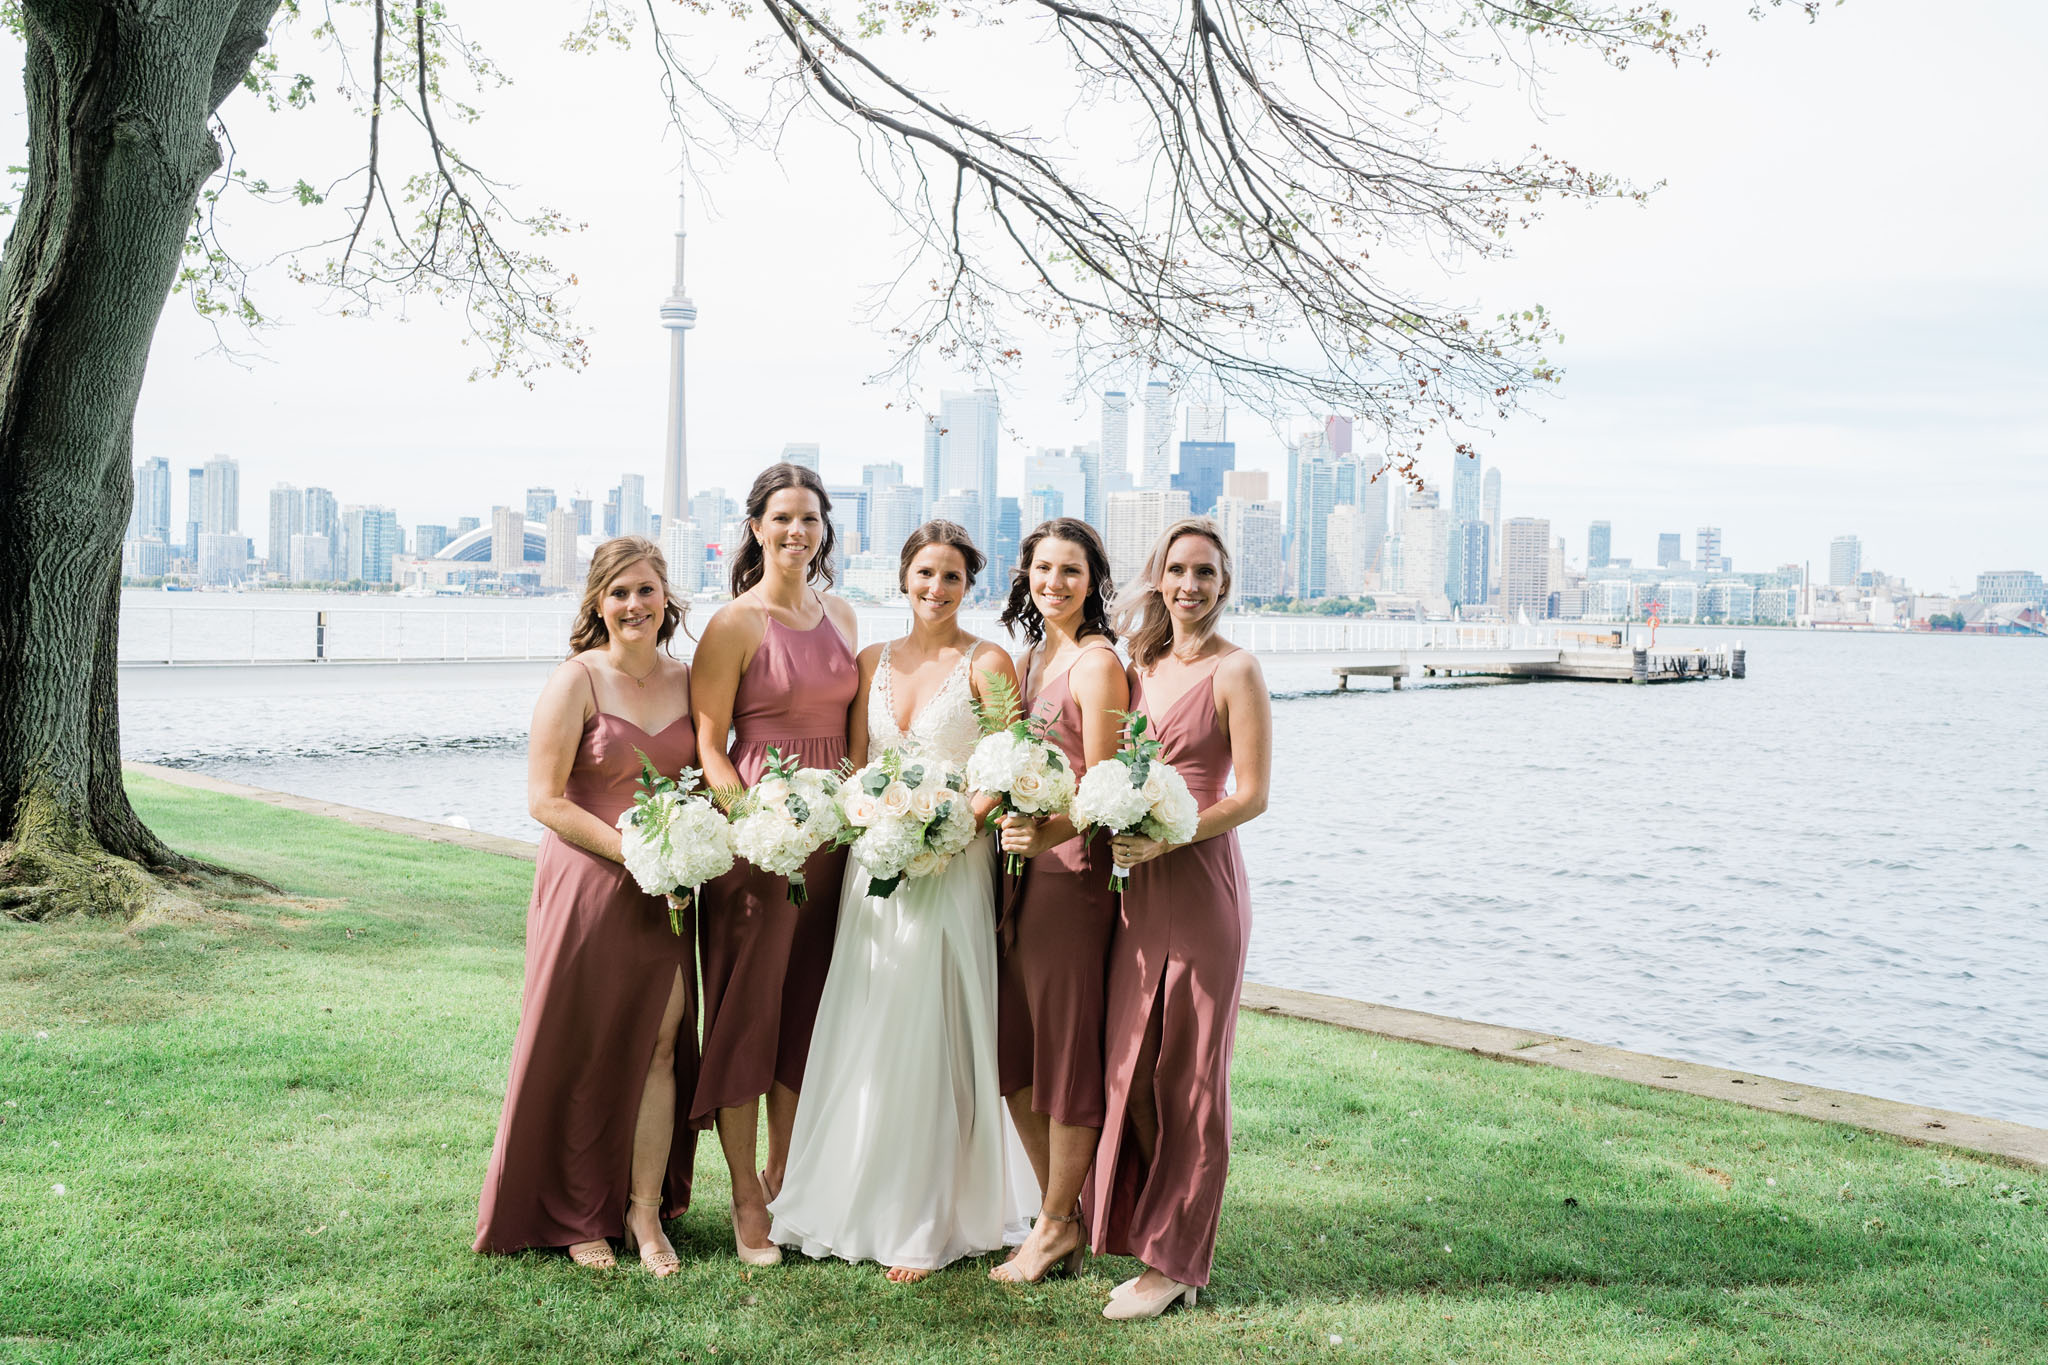 Bride with bridesmaids on the estate grounds with the Toronto skyline as a backdrop. Perfect RCYC wedding